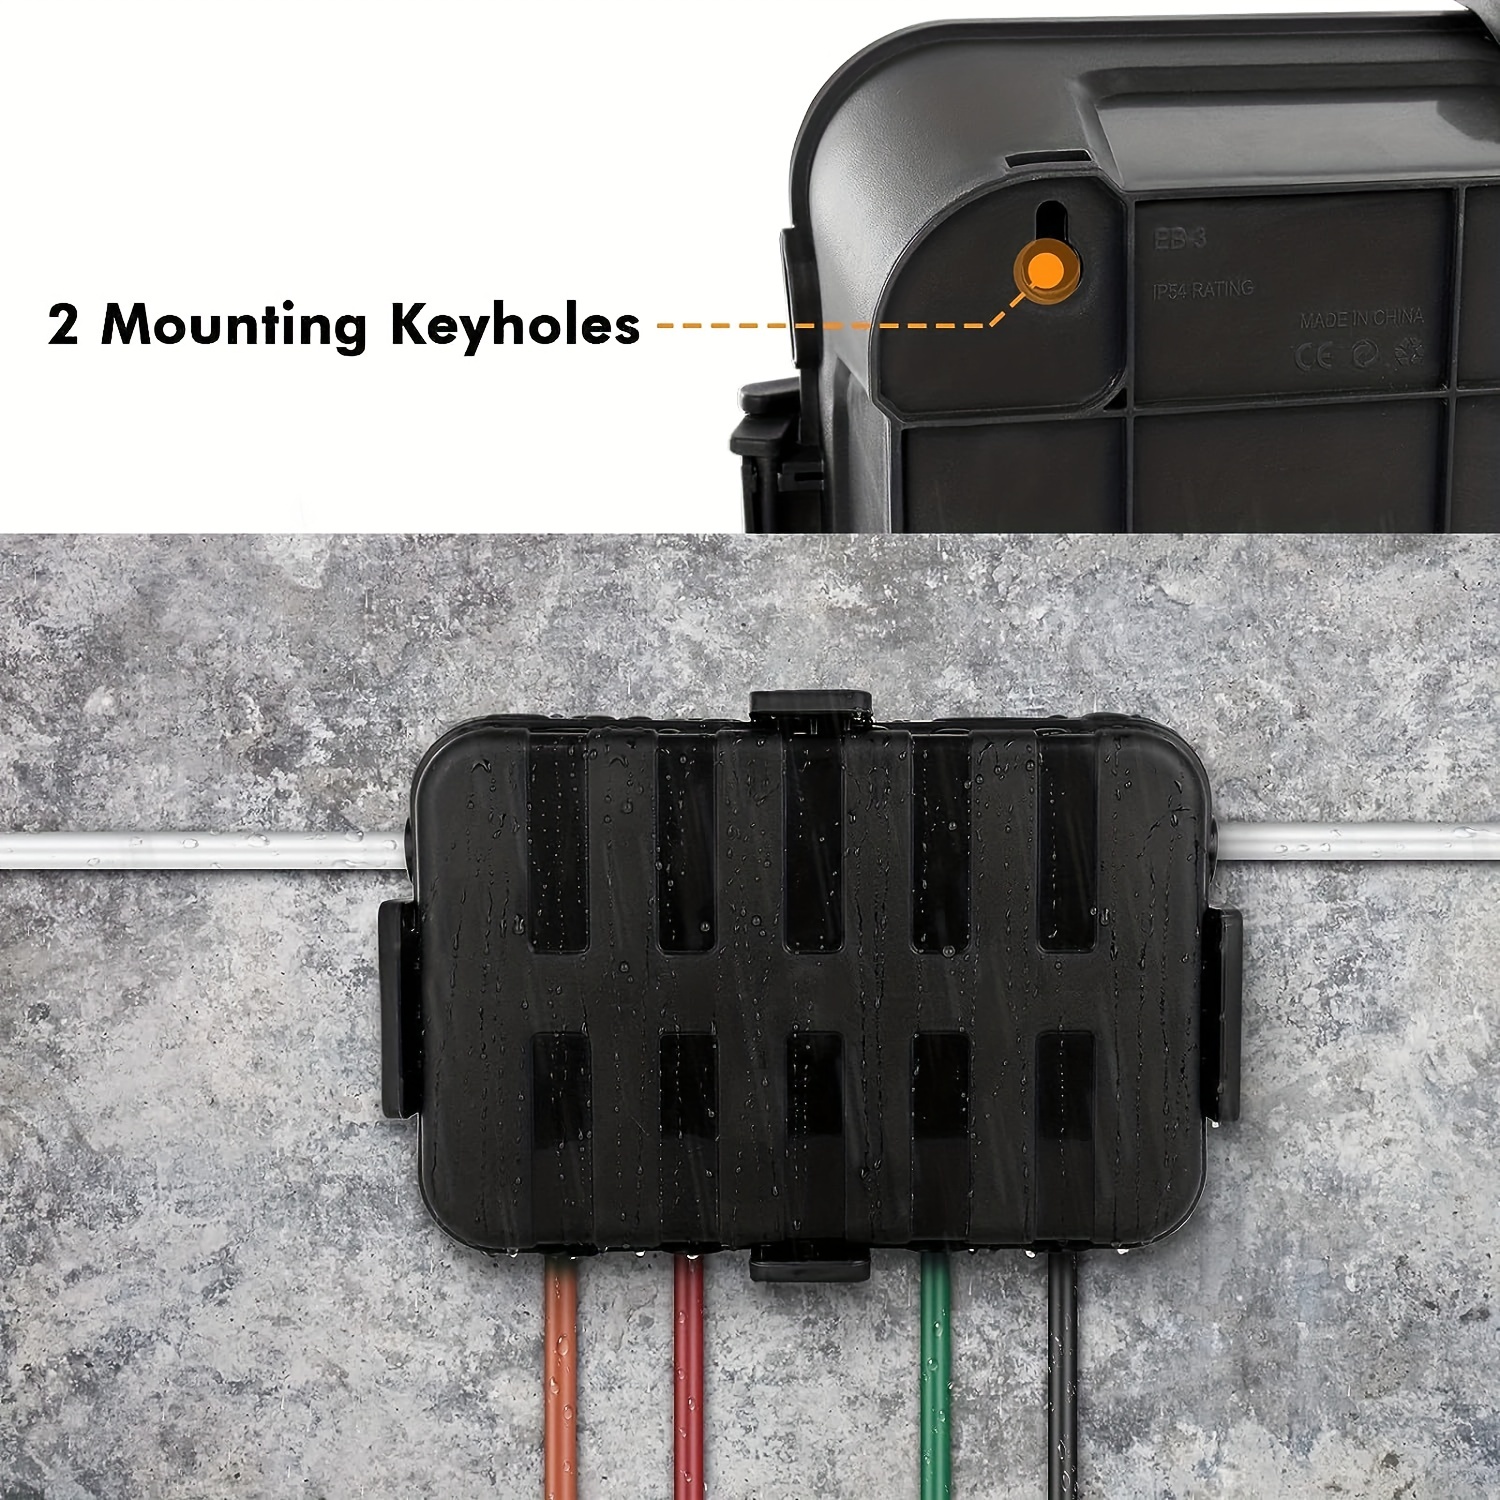 Waterproof Outdoor Cord Extension Cord Safety Cover Electrical Extension Cord  Cable Protector Connector Box Home Improvement